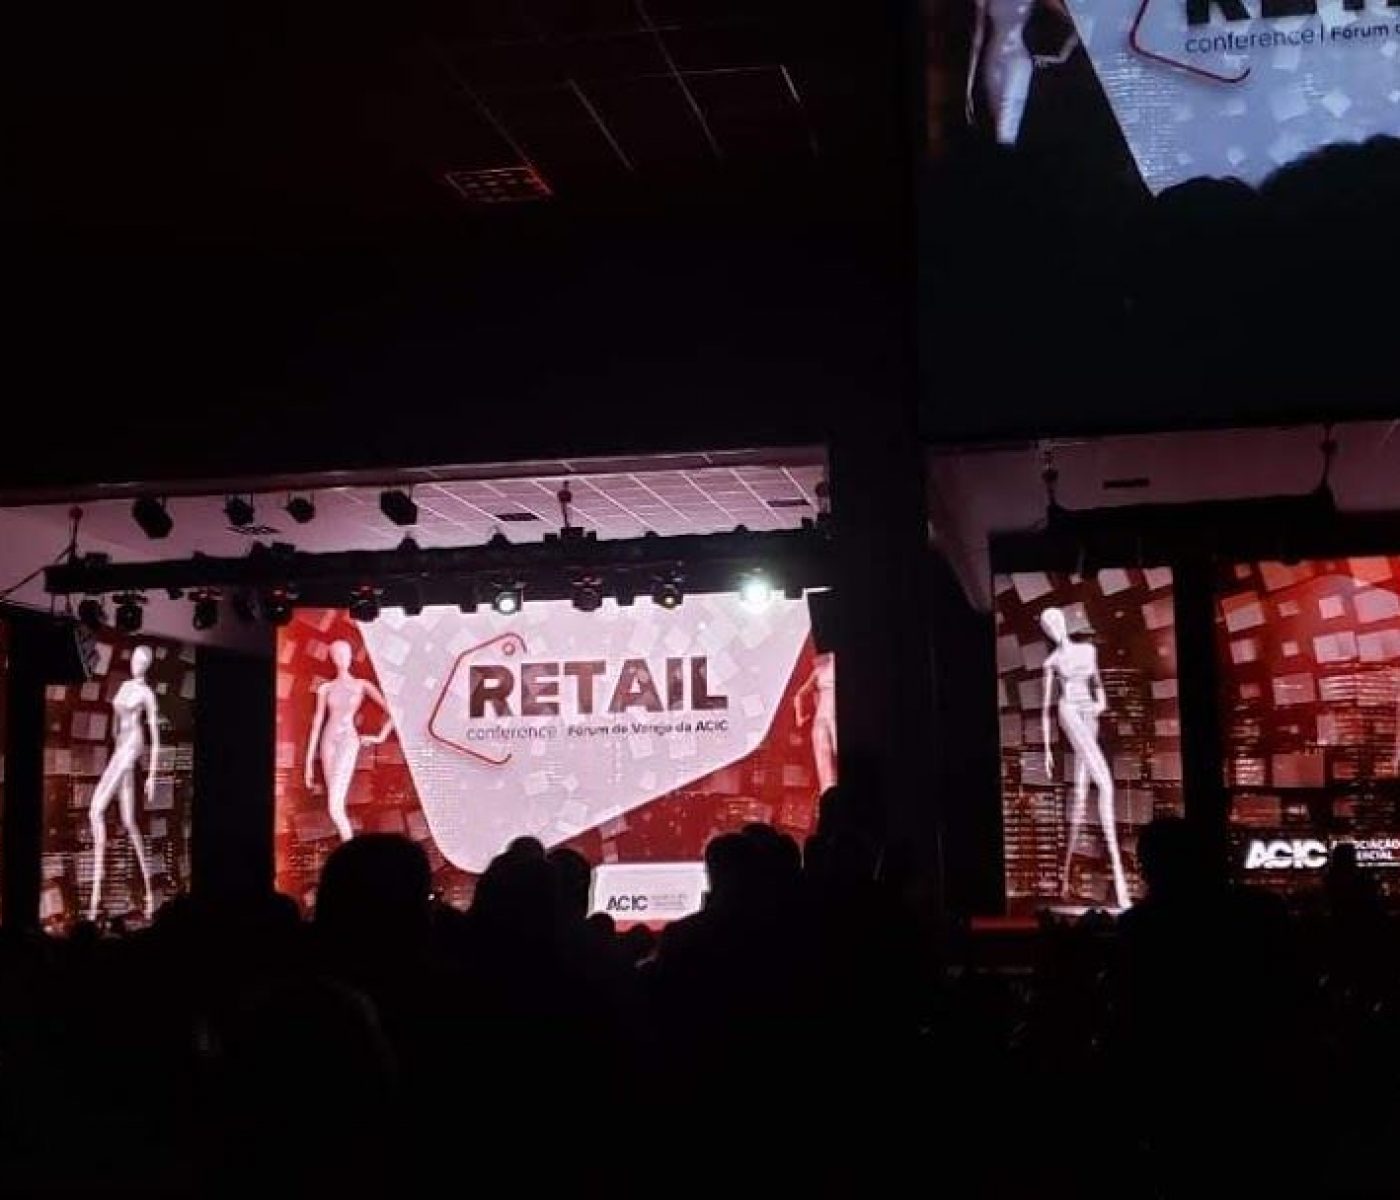 Retail Conference